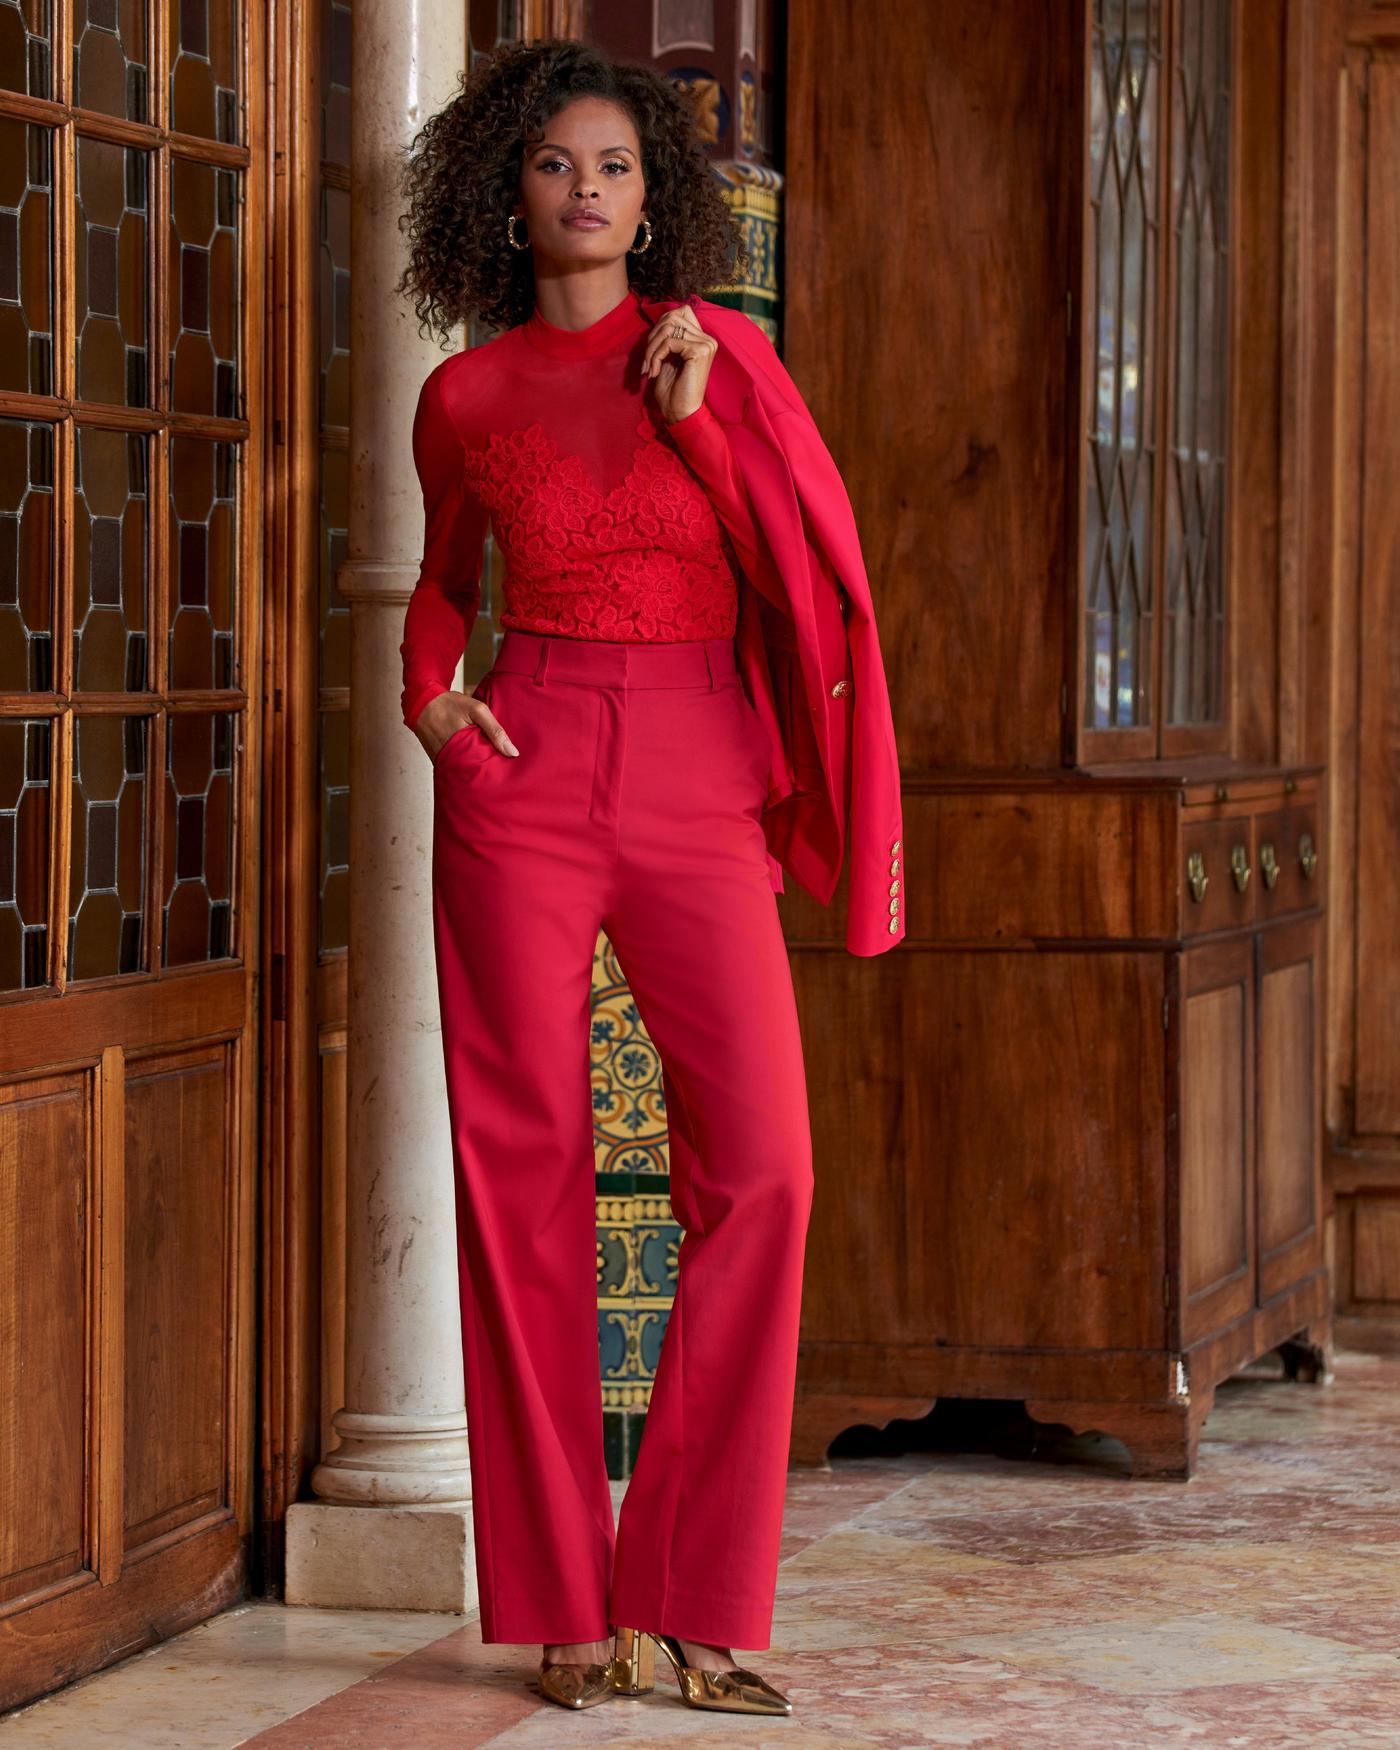 High Waist Pants Are Back  Red wide leg pants, Style, Work attire